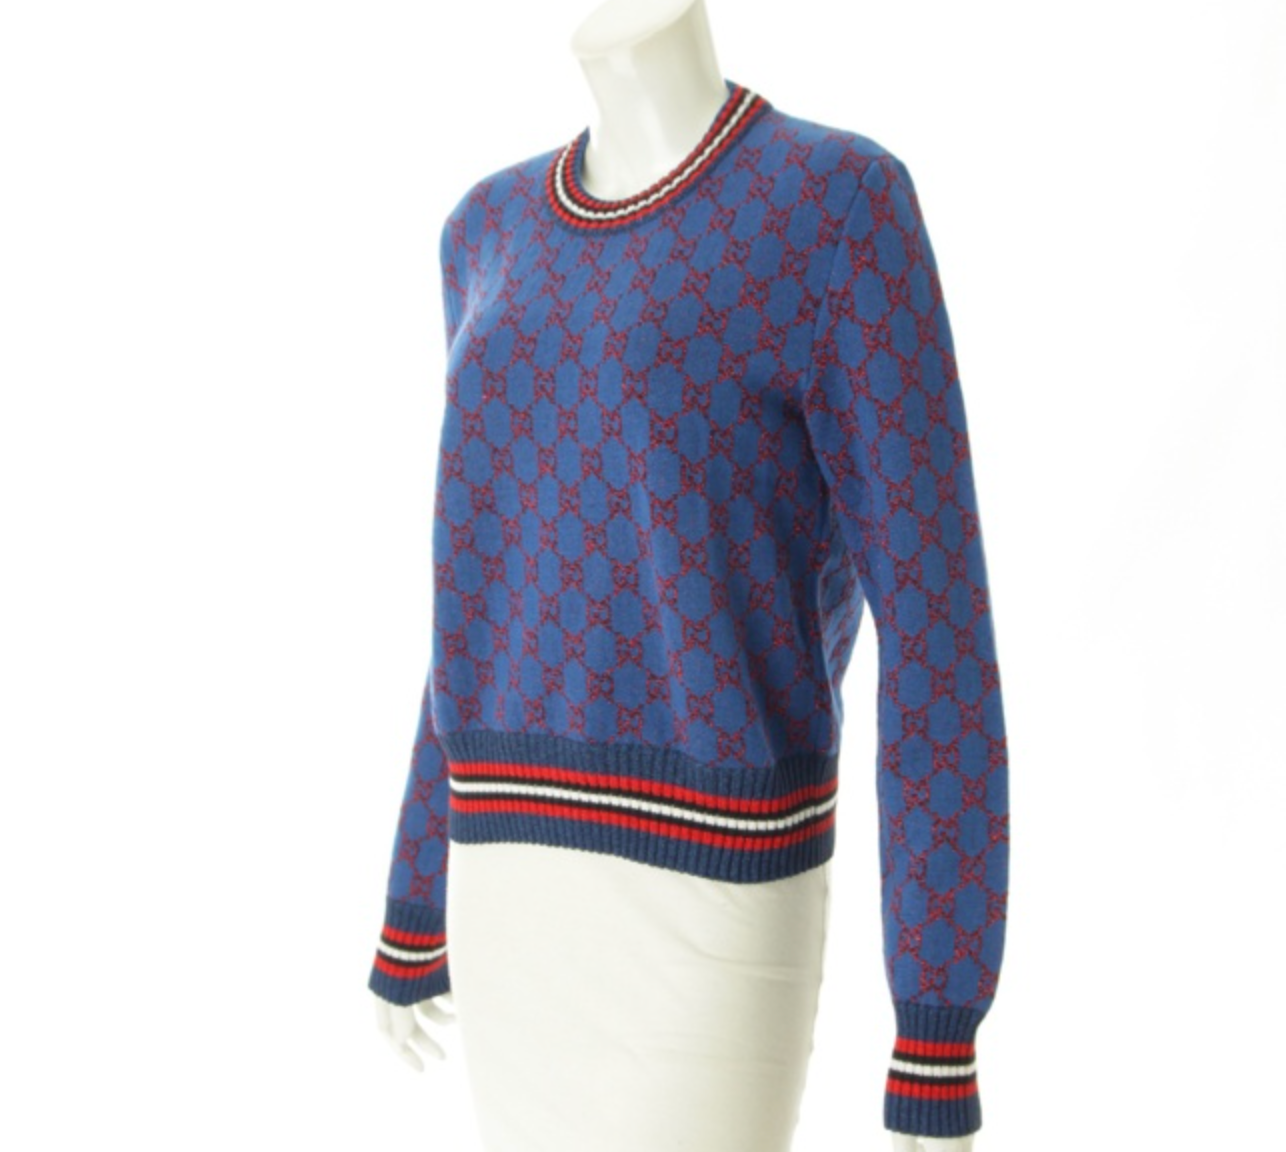 Gucci Gg Wool Jacquard Sweater in Blue for Men